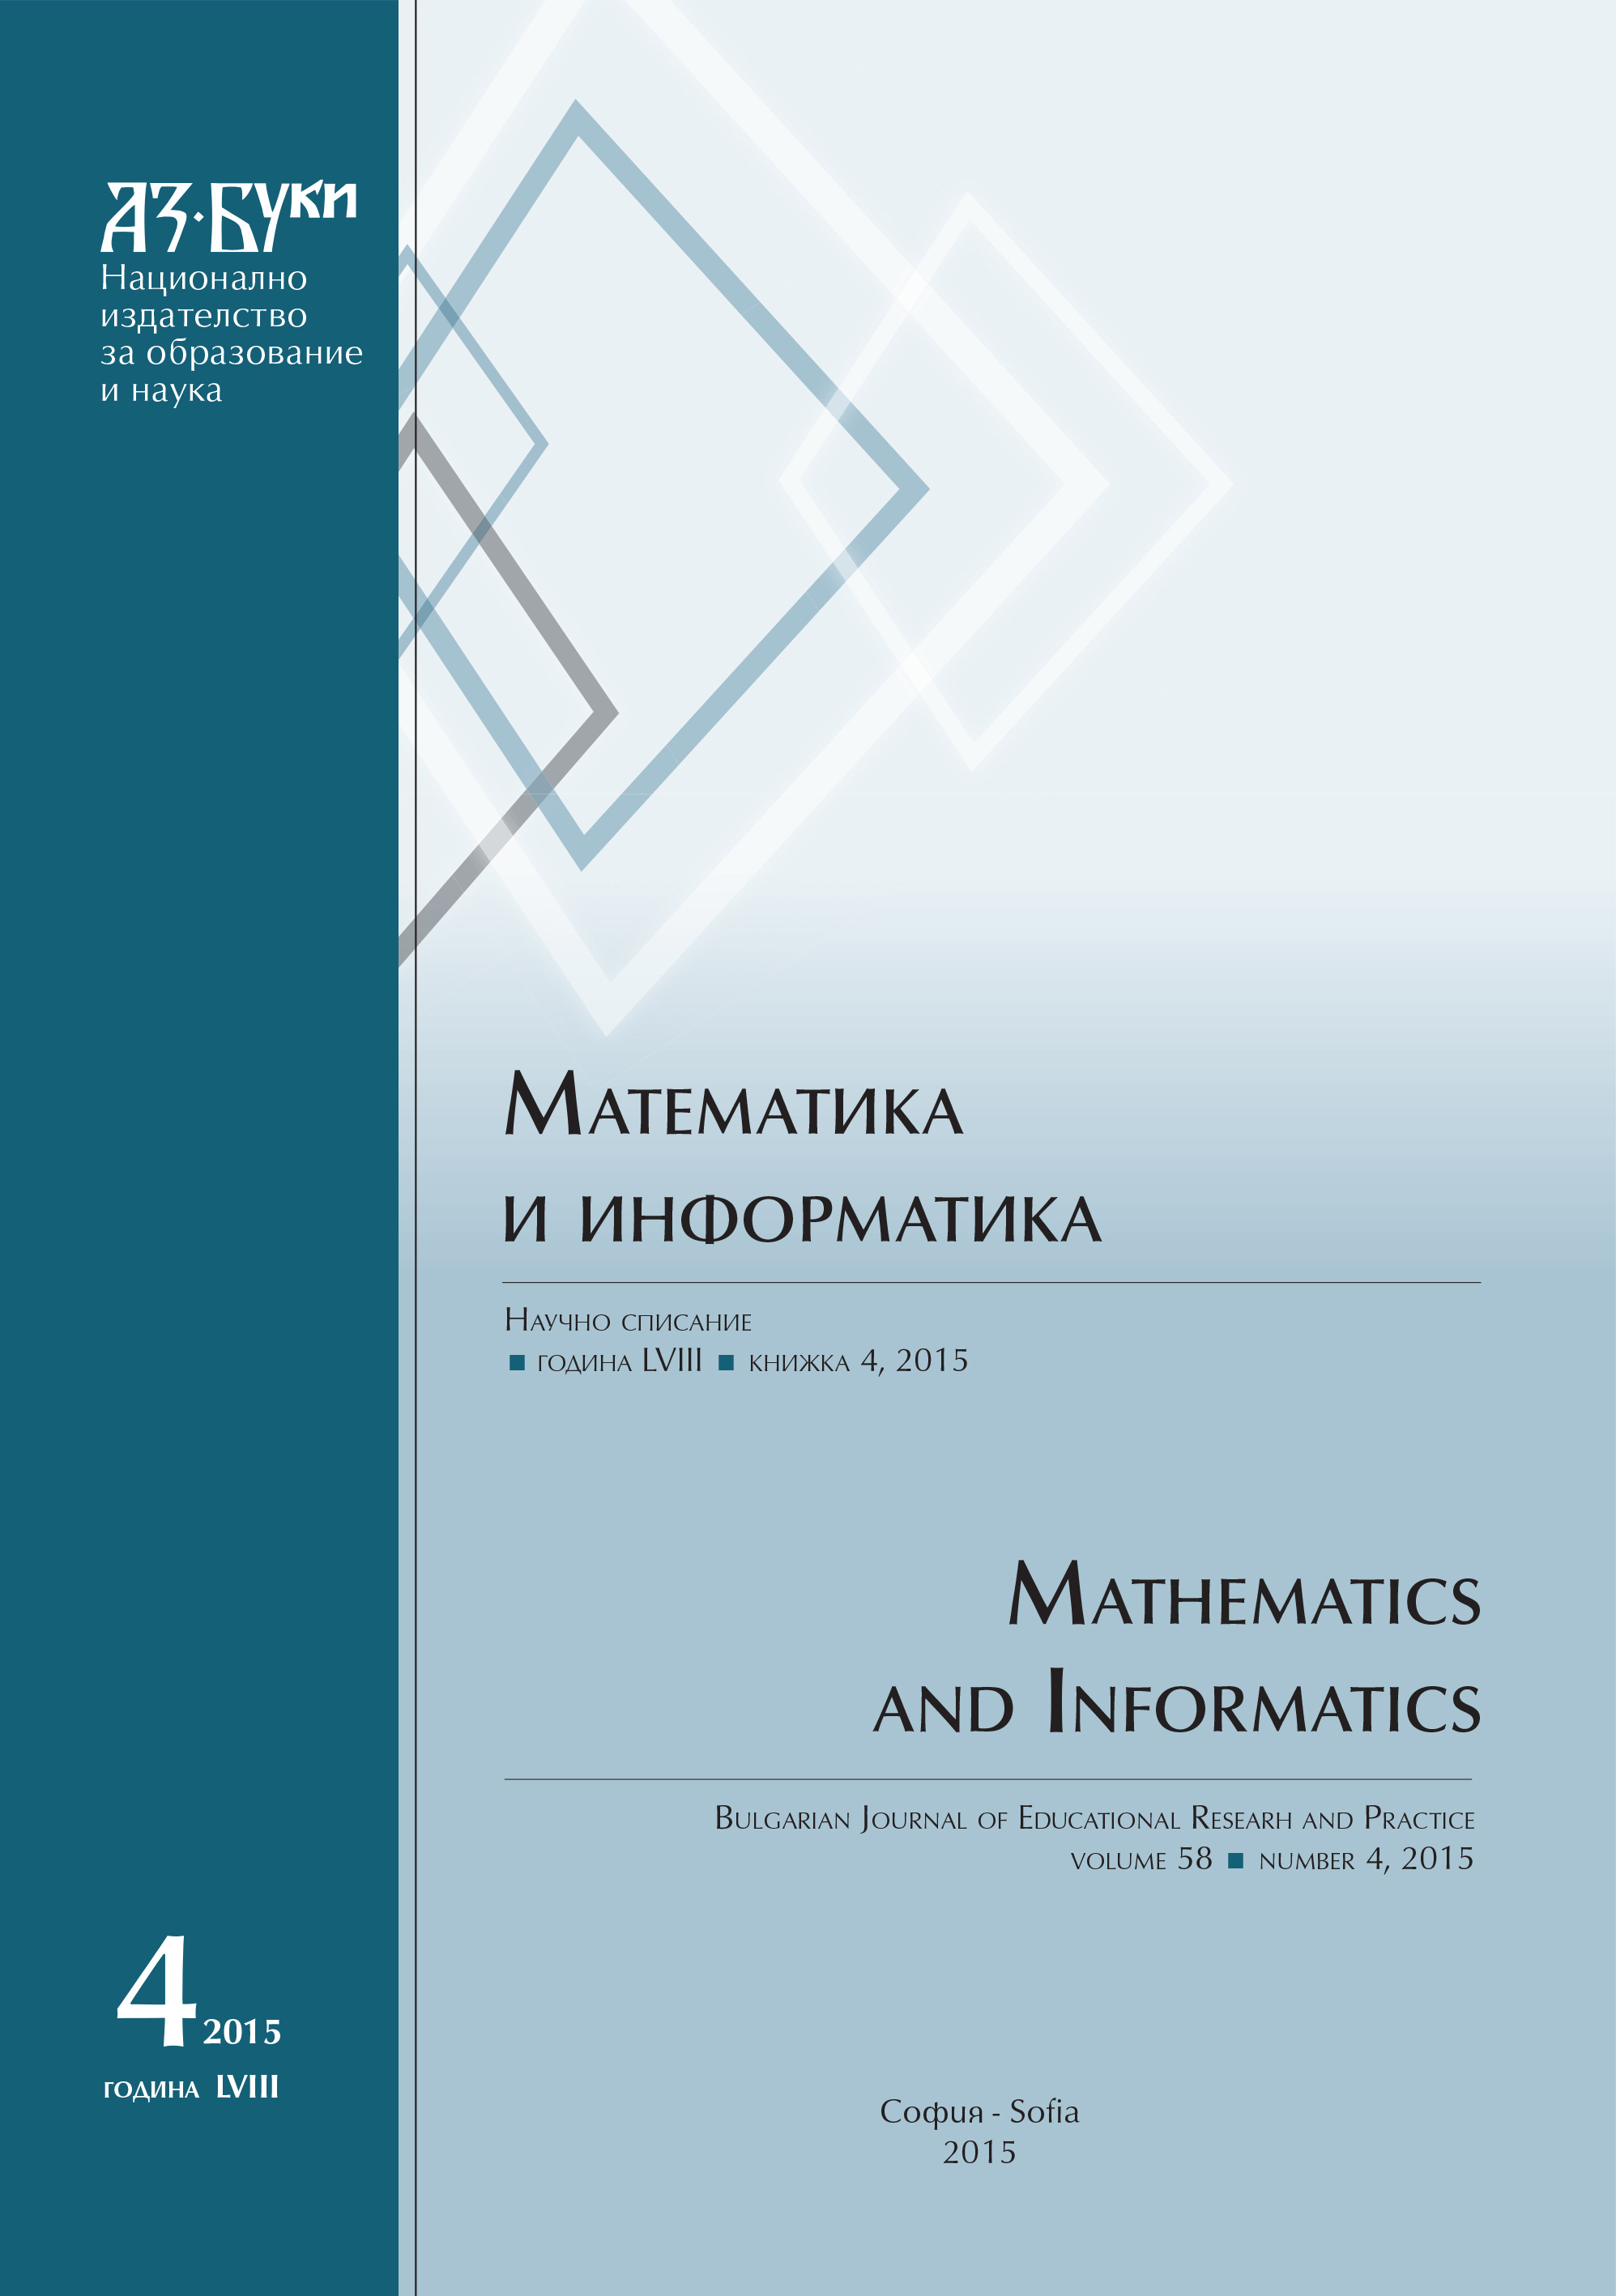 Analysis of the Paper for the Regional Round of the International
Mathematical Competition for University Students “European Kangaroo” Cover Image